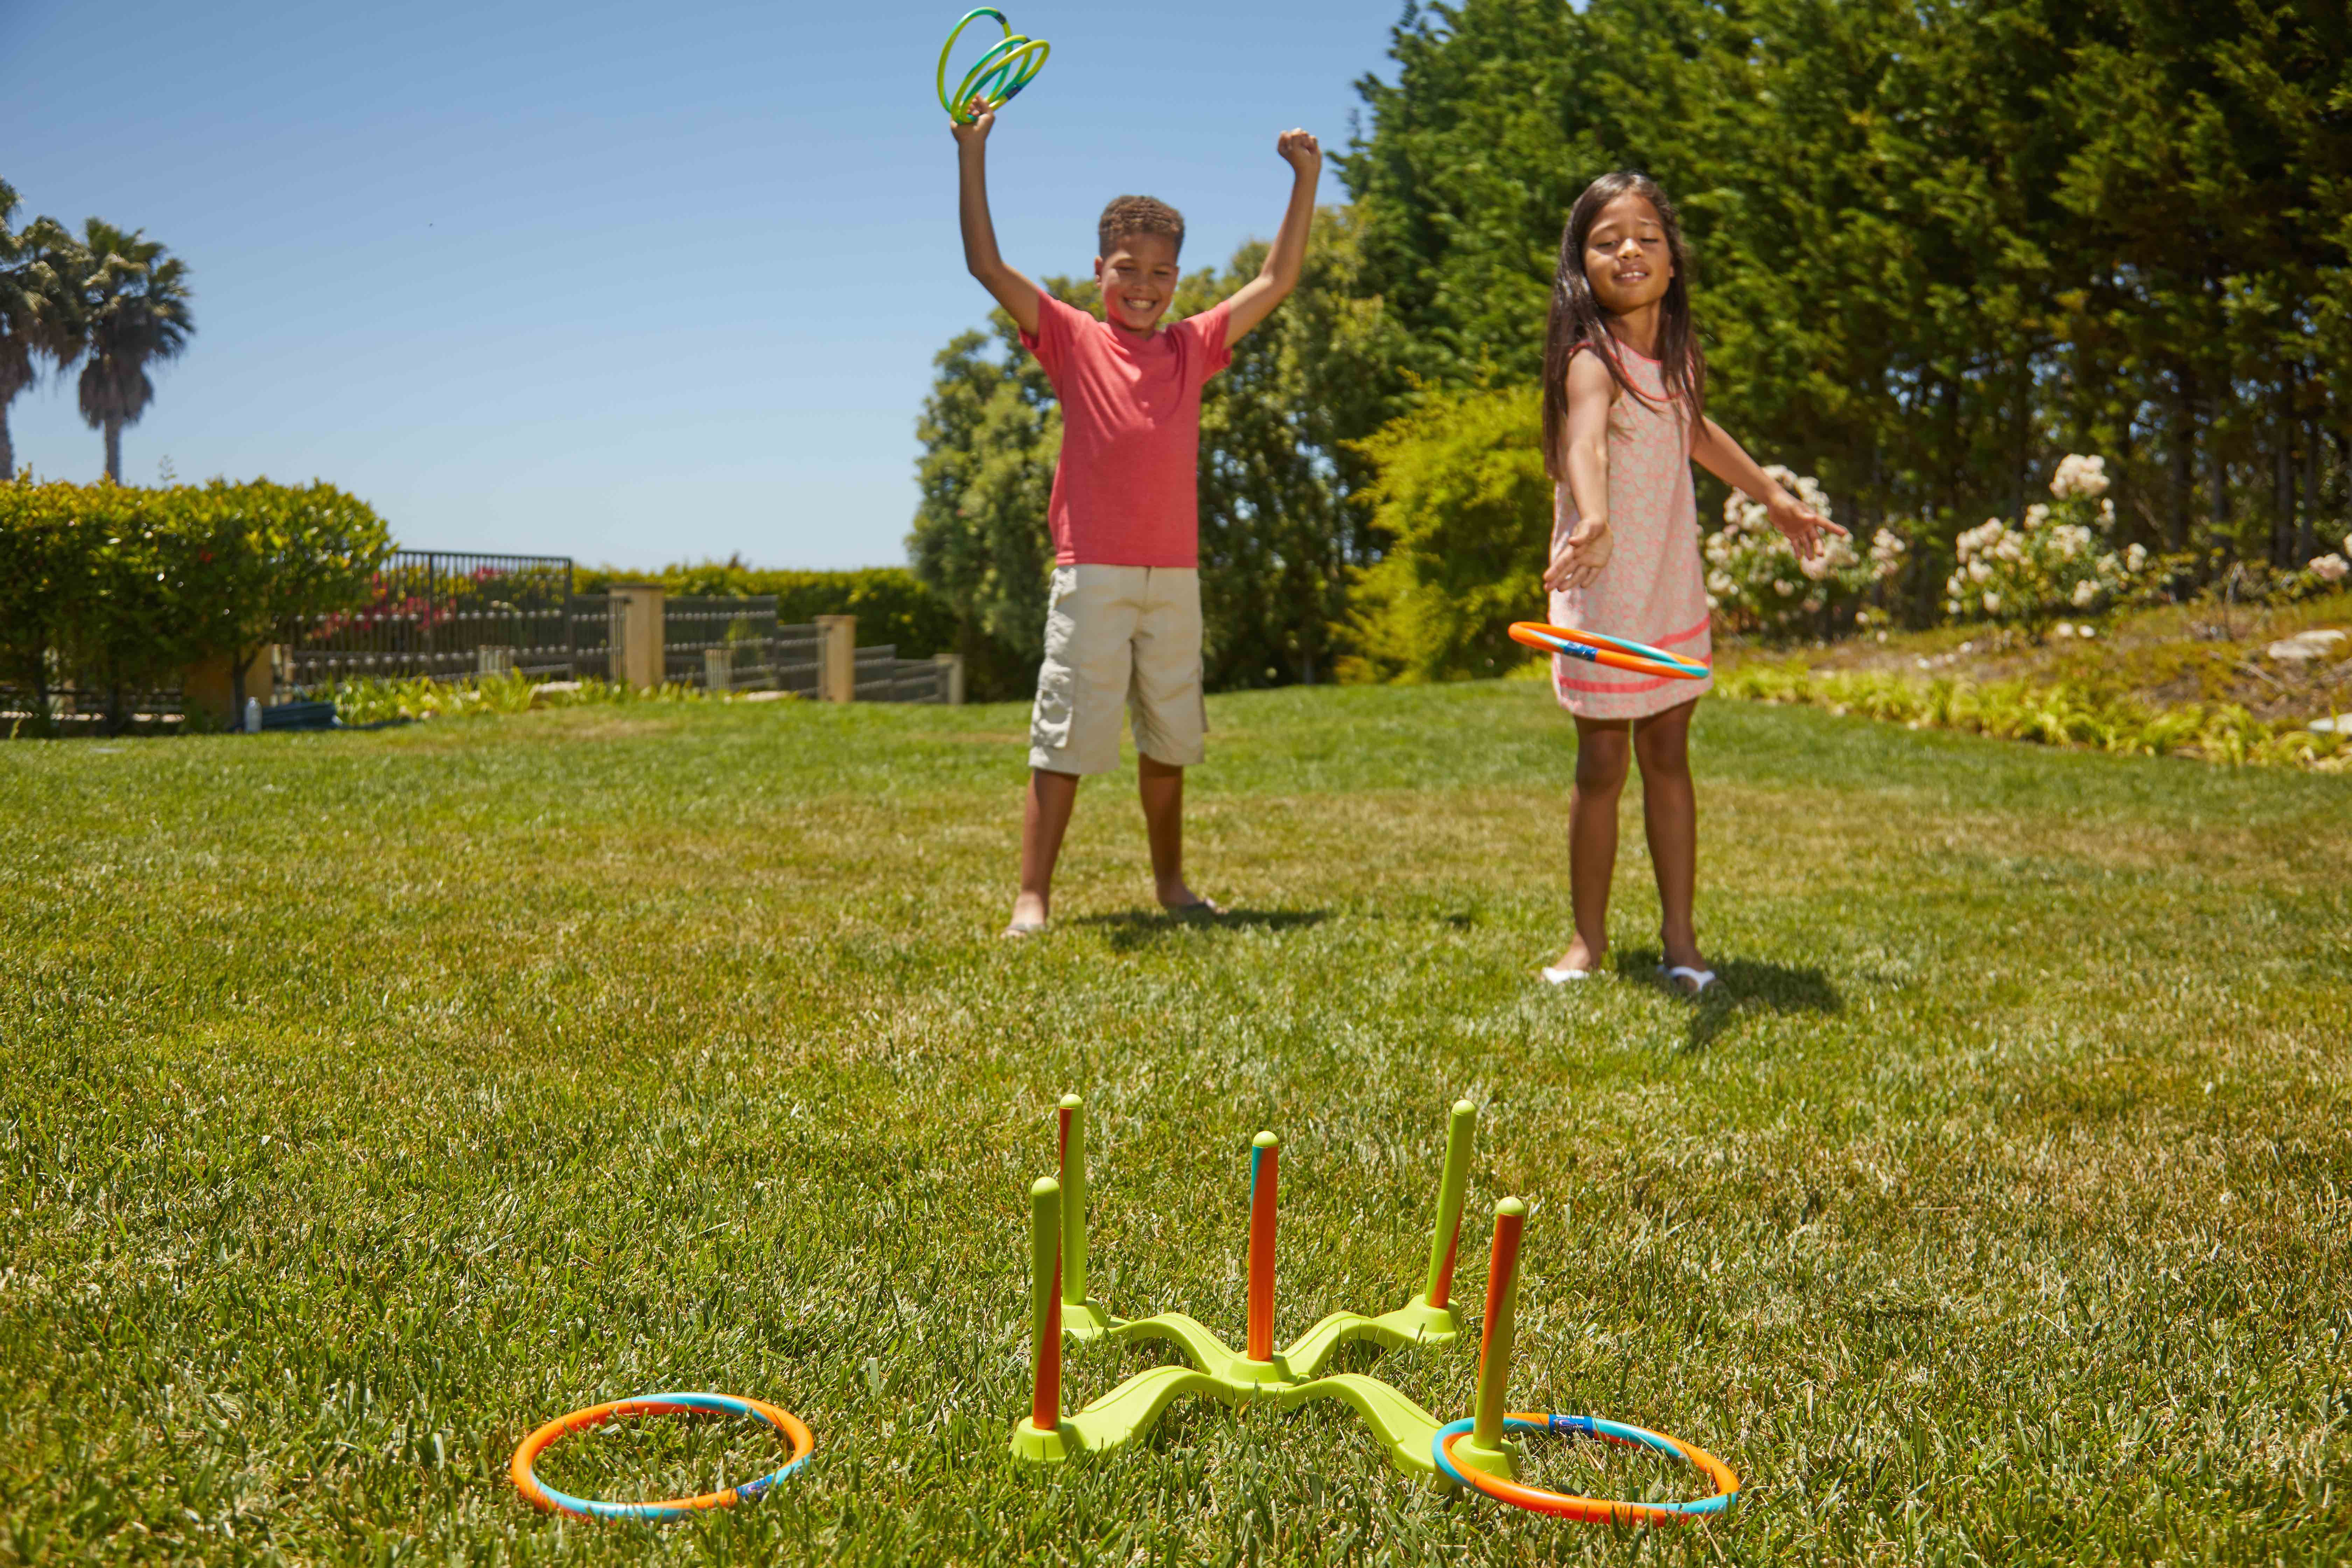 612 Ring Toss Play Images, Stock Photos, 3D objects, & Vectors |  Shutterstock